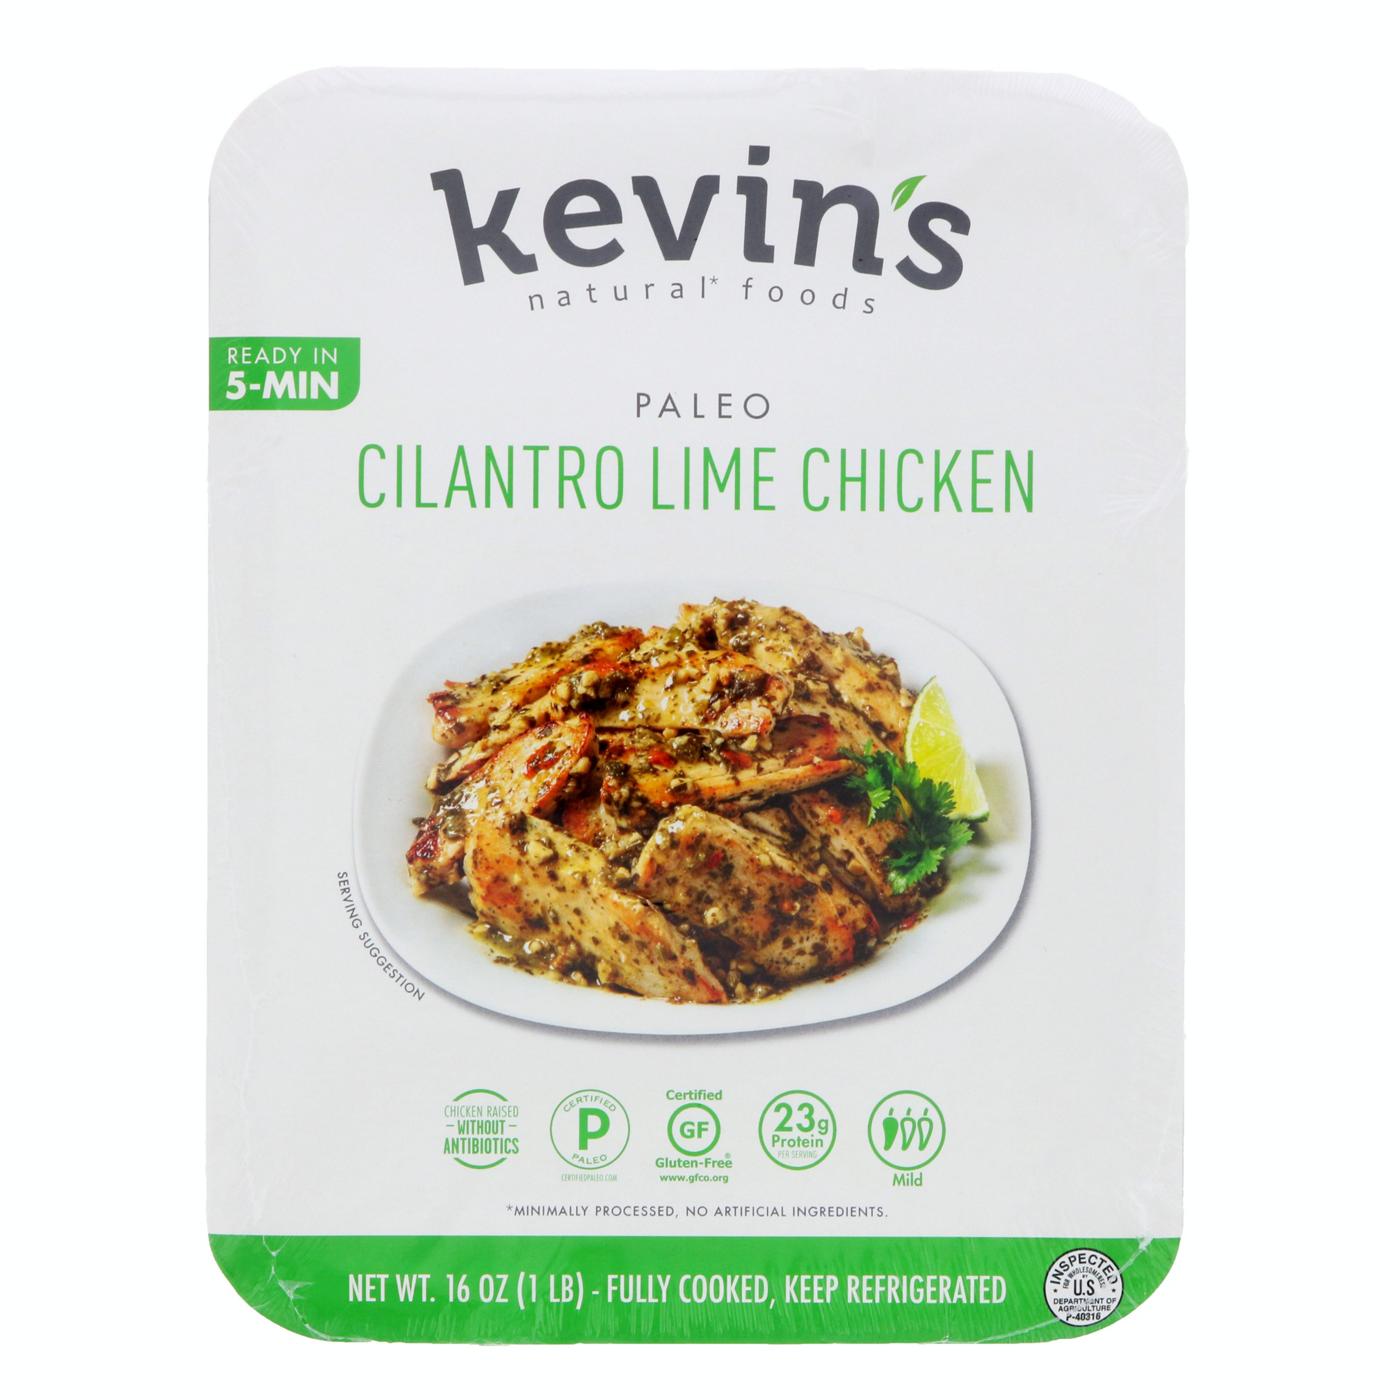 Kevin's Natural Foods Paleo Cilantro Lime Chicken; image 1 of 3